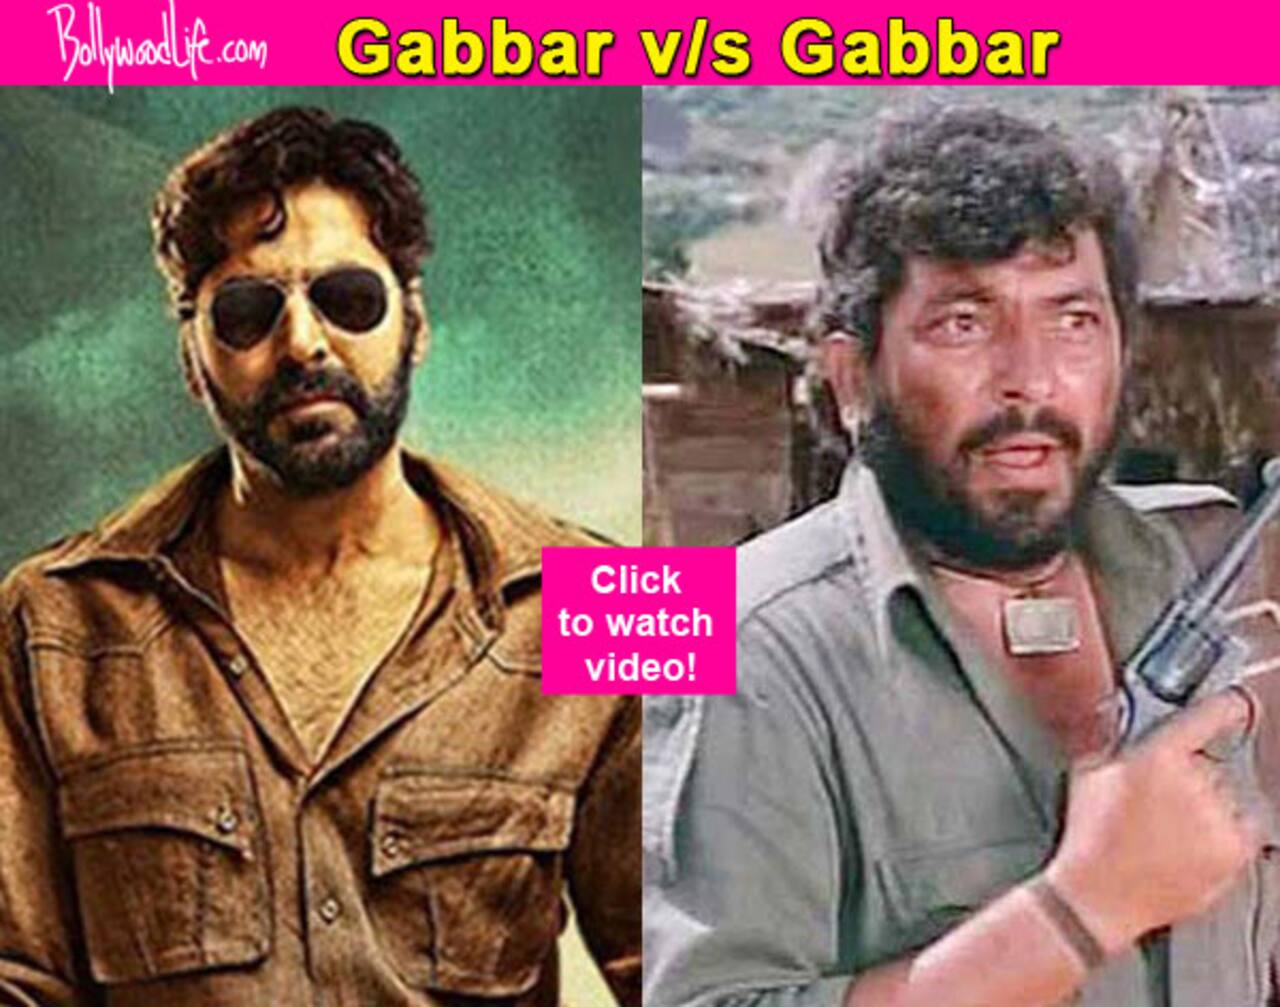 Gabbar vs Gabbar: Akshay Kumar and Amjad Khan try to outscore each other in  this new Gabbar mashup! Watch video - Bollywood News & Gossip, Movie  Reviews, Trailers & Videos at 